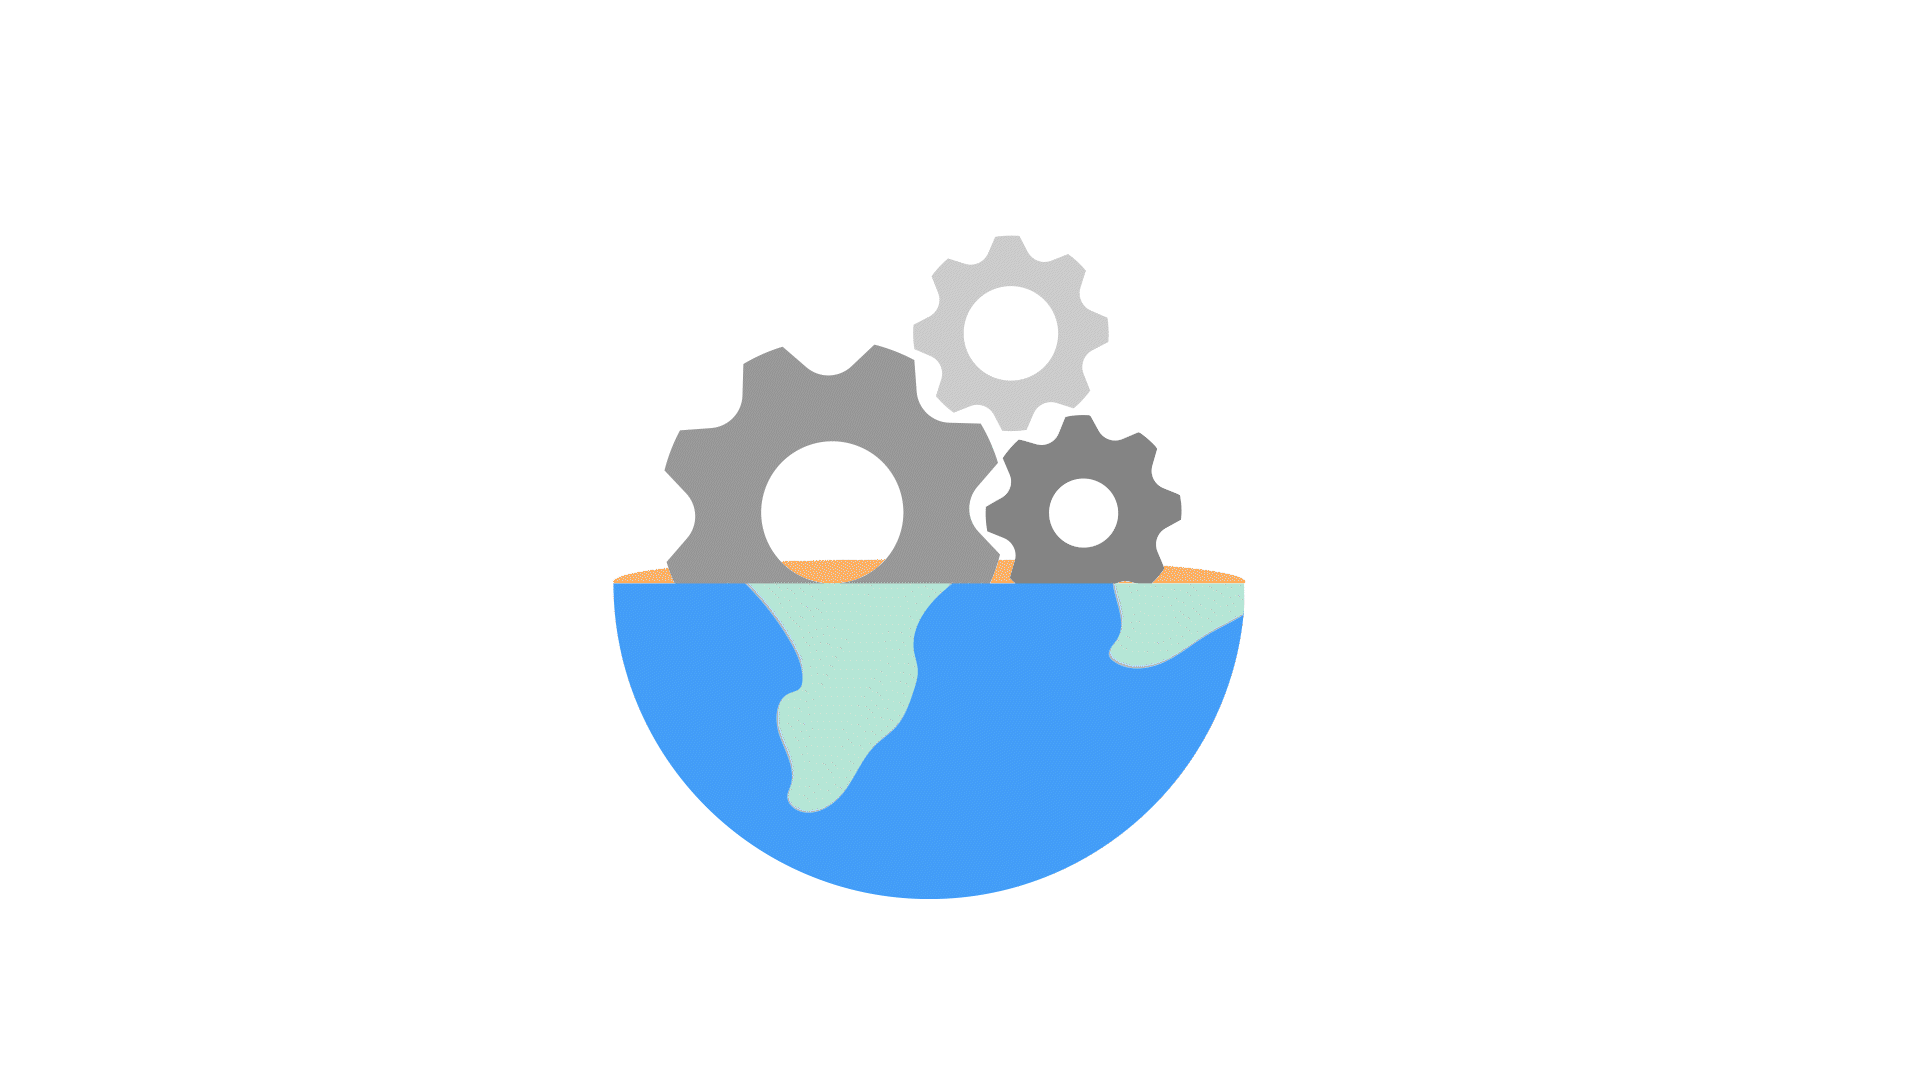 Animation of a globe with three gears turning.